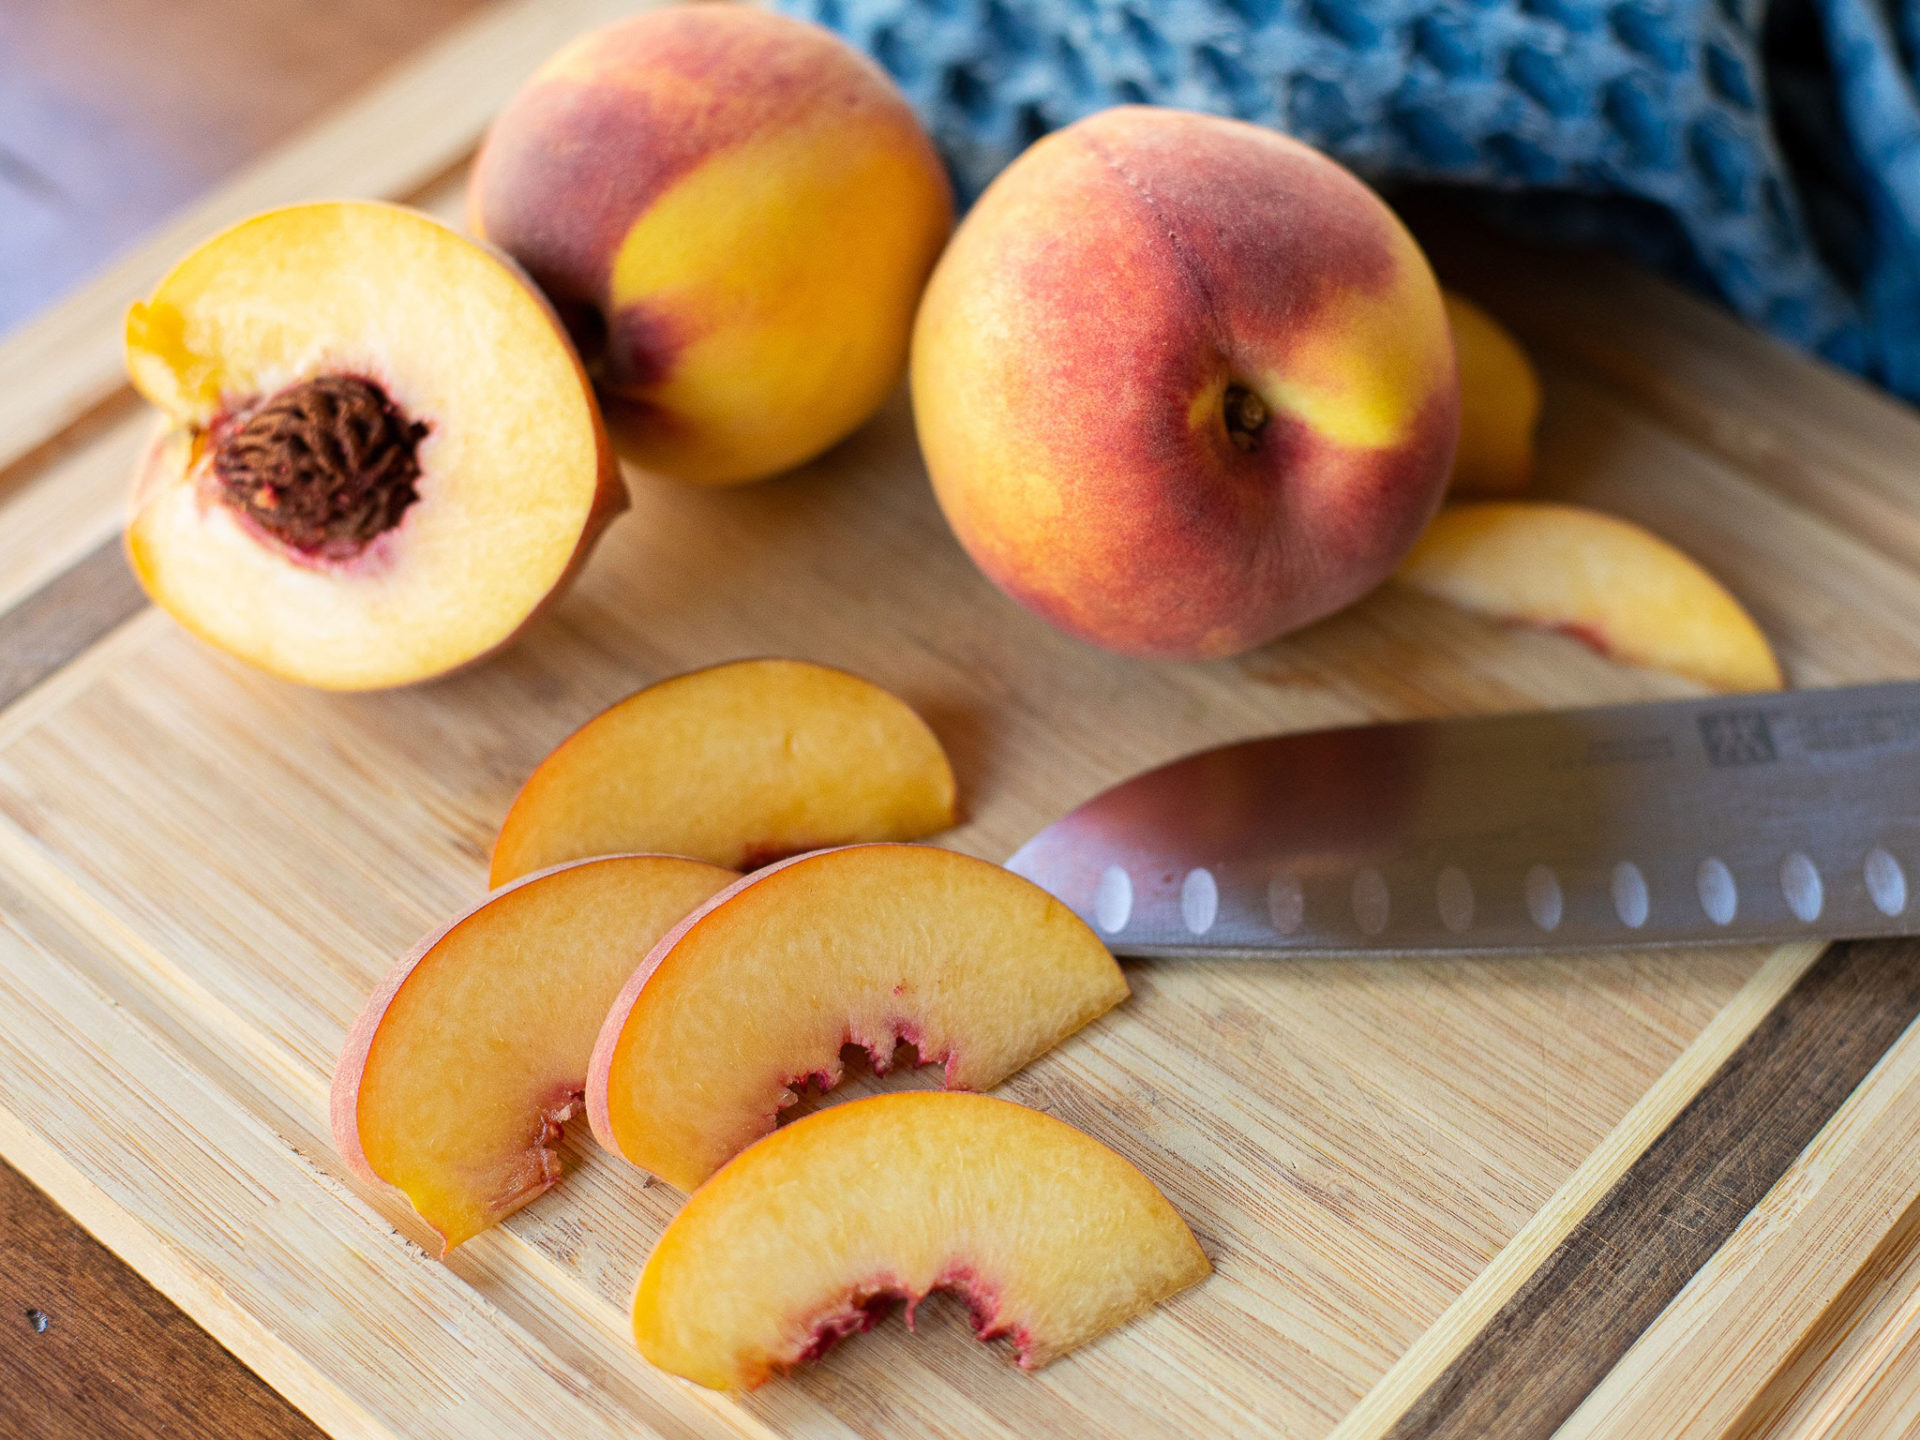 Southern Peaches Only 79¢ Per Pound At Kroger